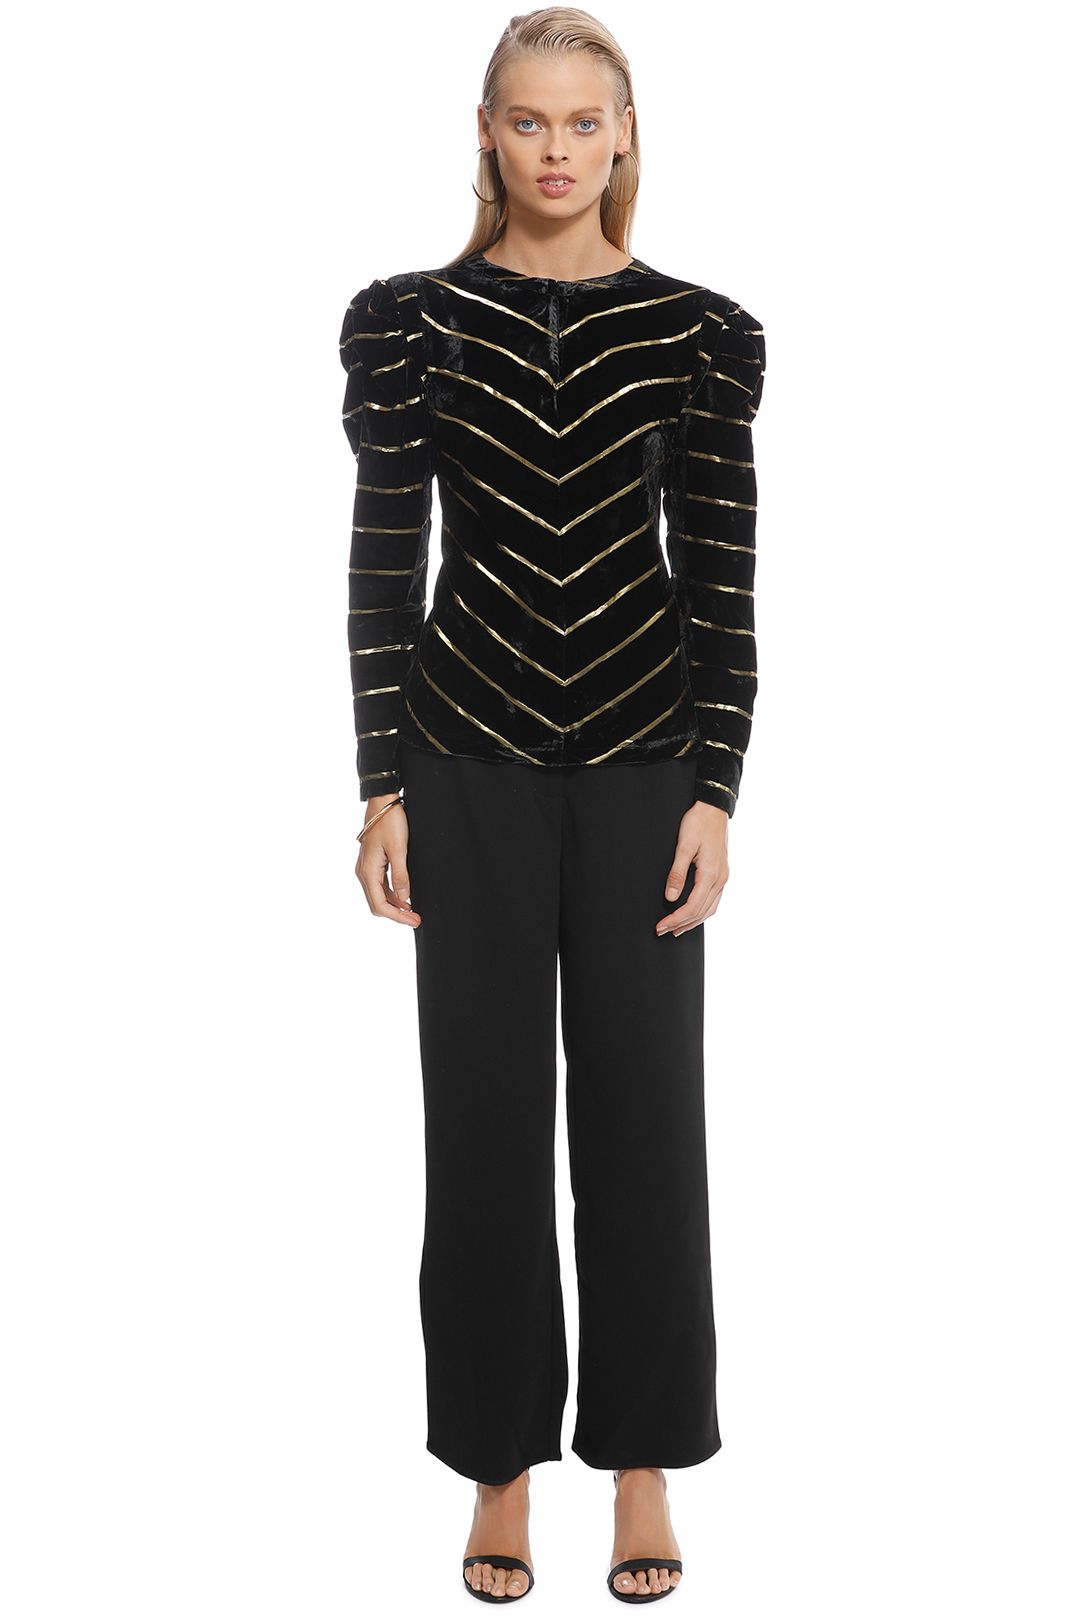 Ministry of Style - Twilight Stripe Top - Black Gold - Front